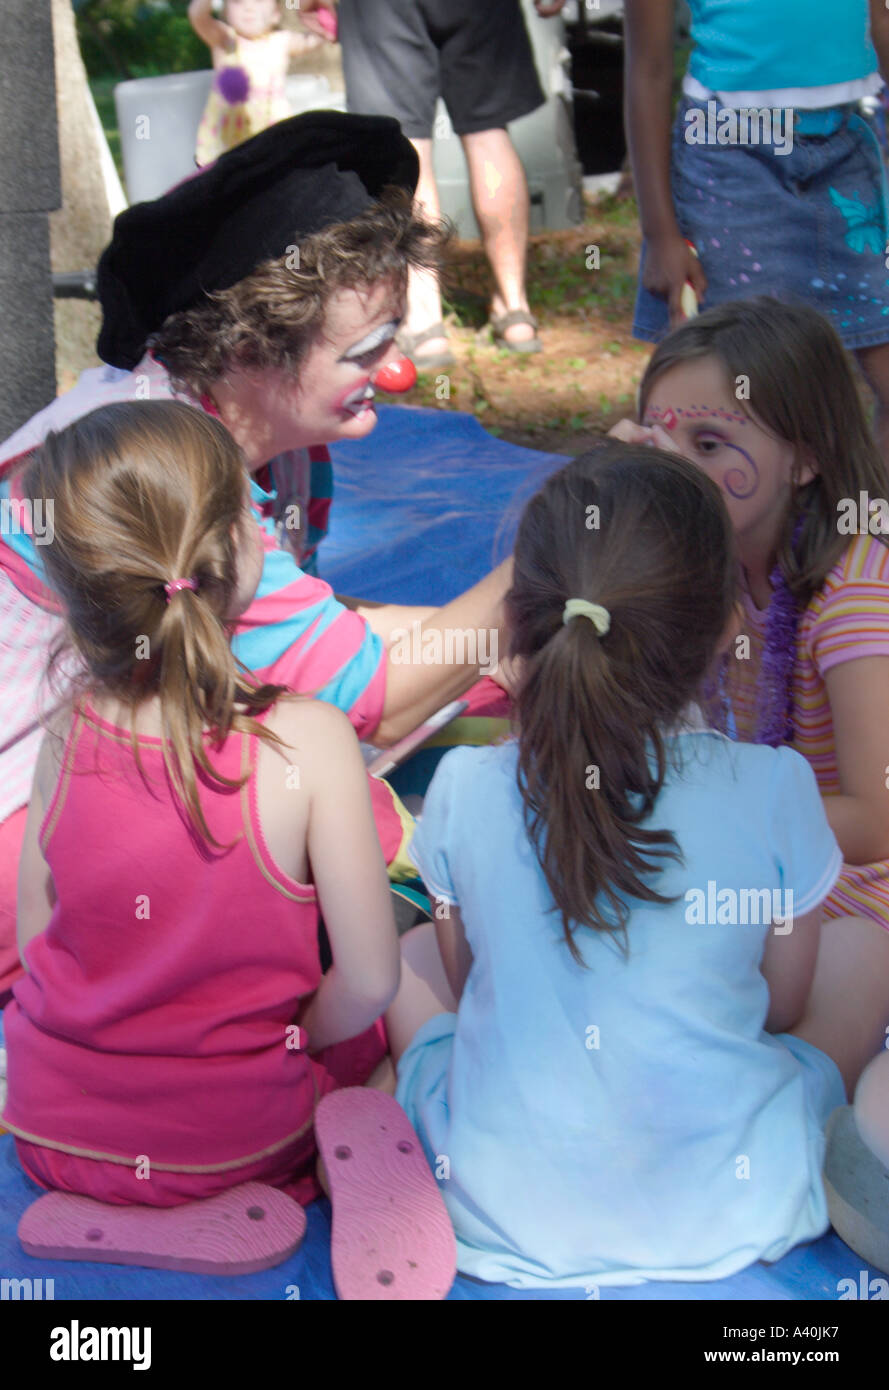 A Clown paints the faces and arms of children at a family picnic Stock Photo